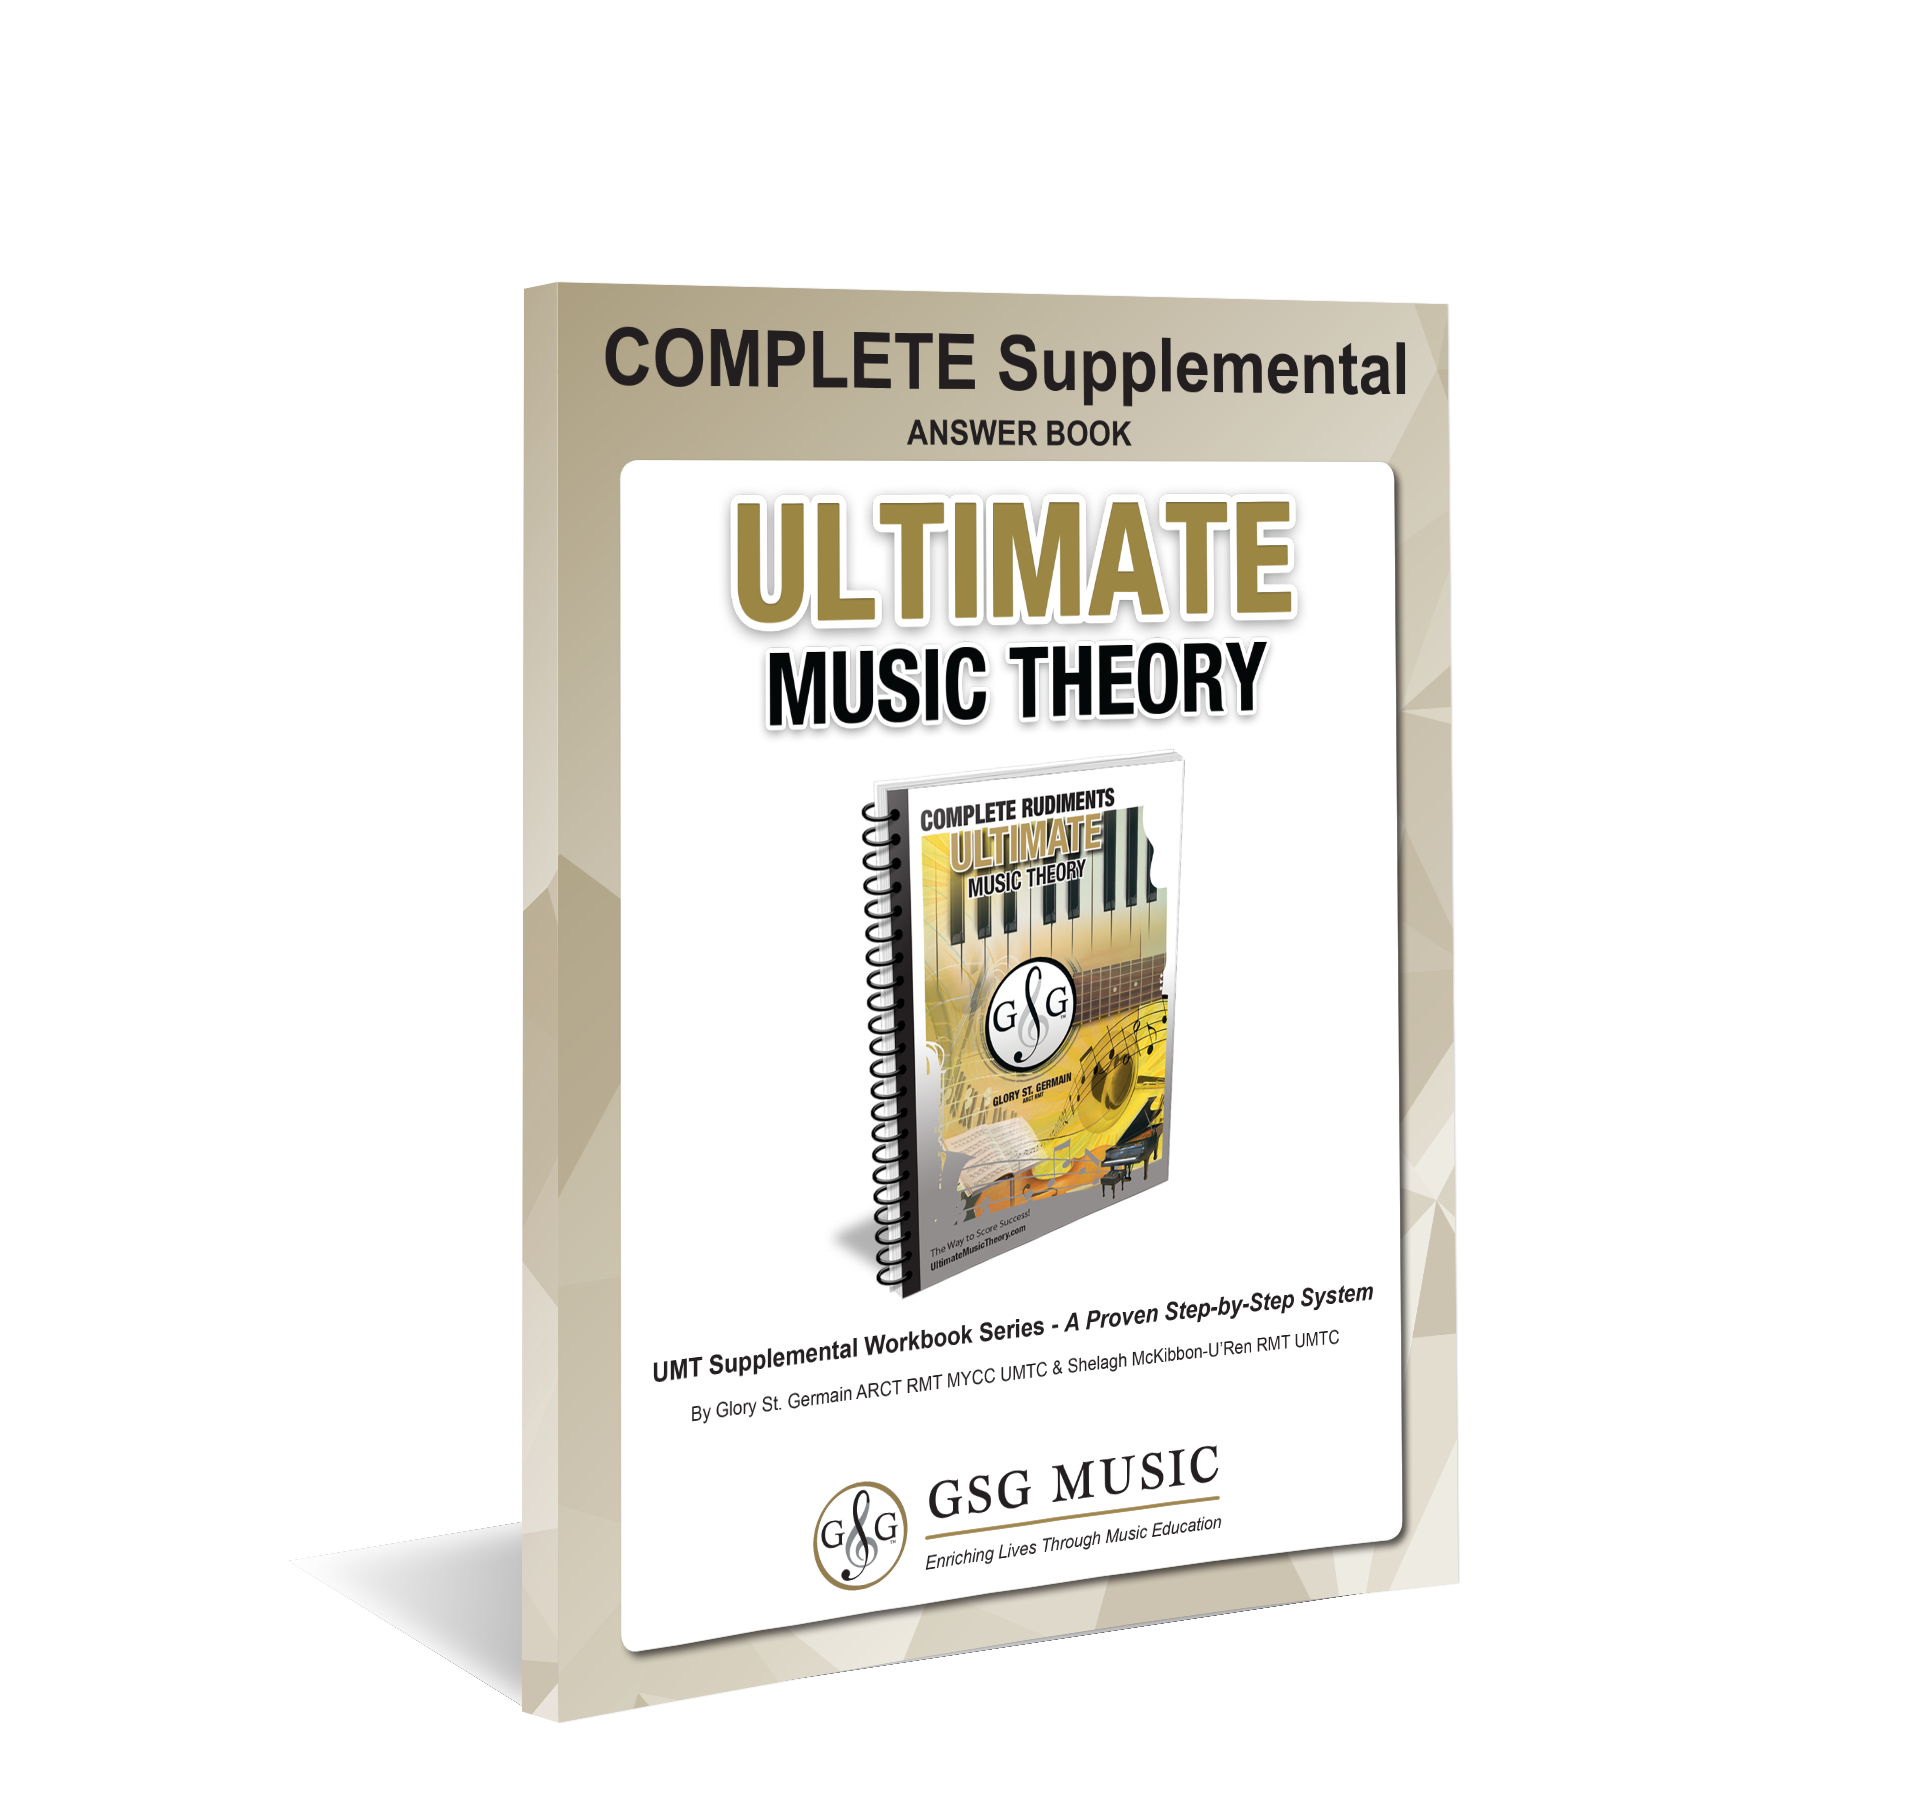 UMT COMPLETE Supplemental Answer Book